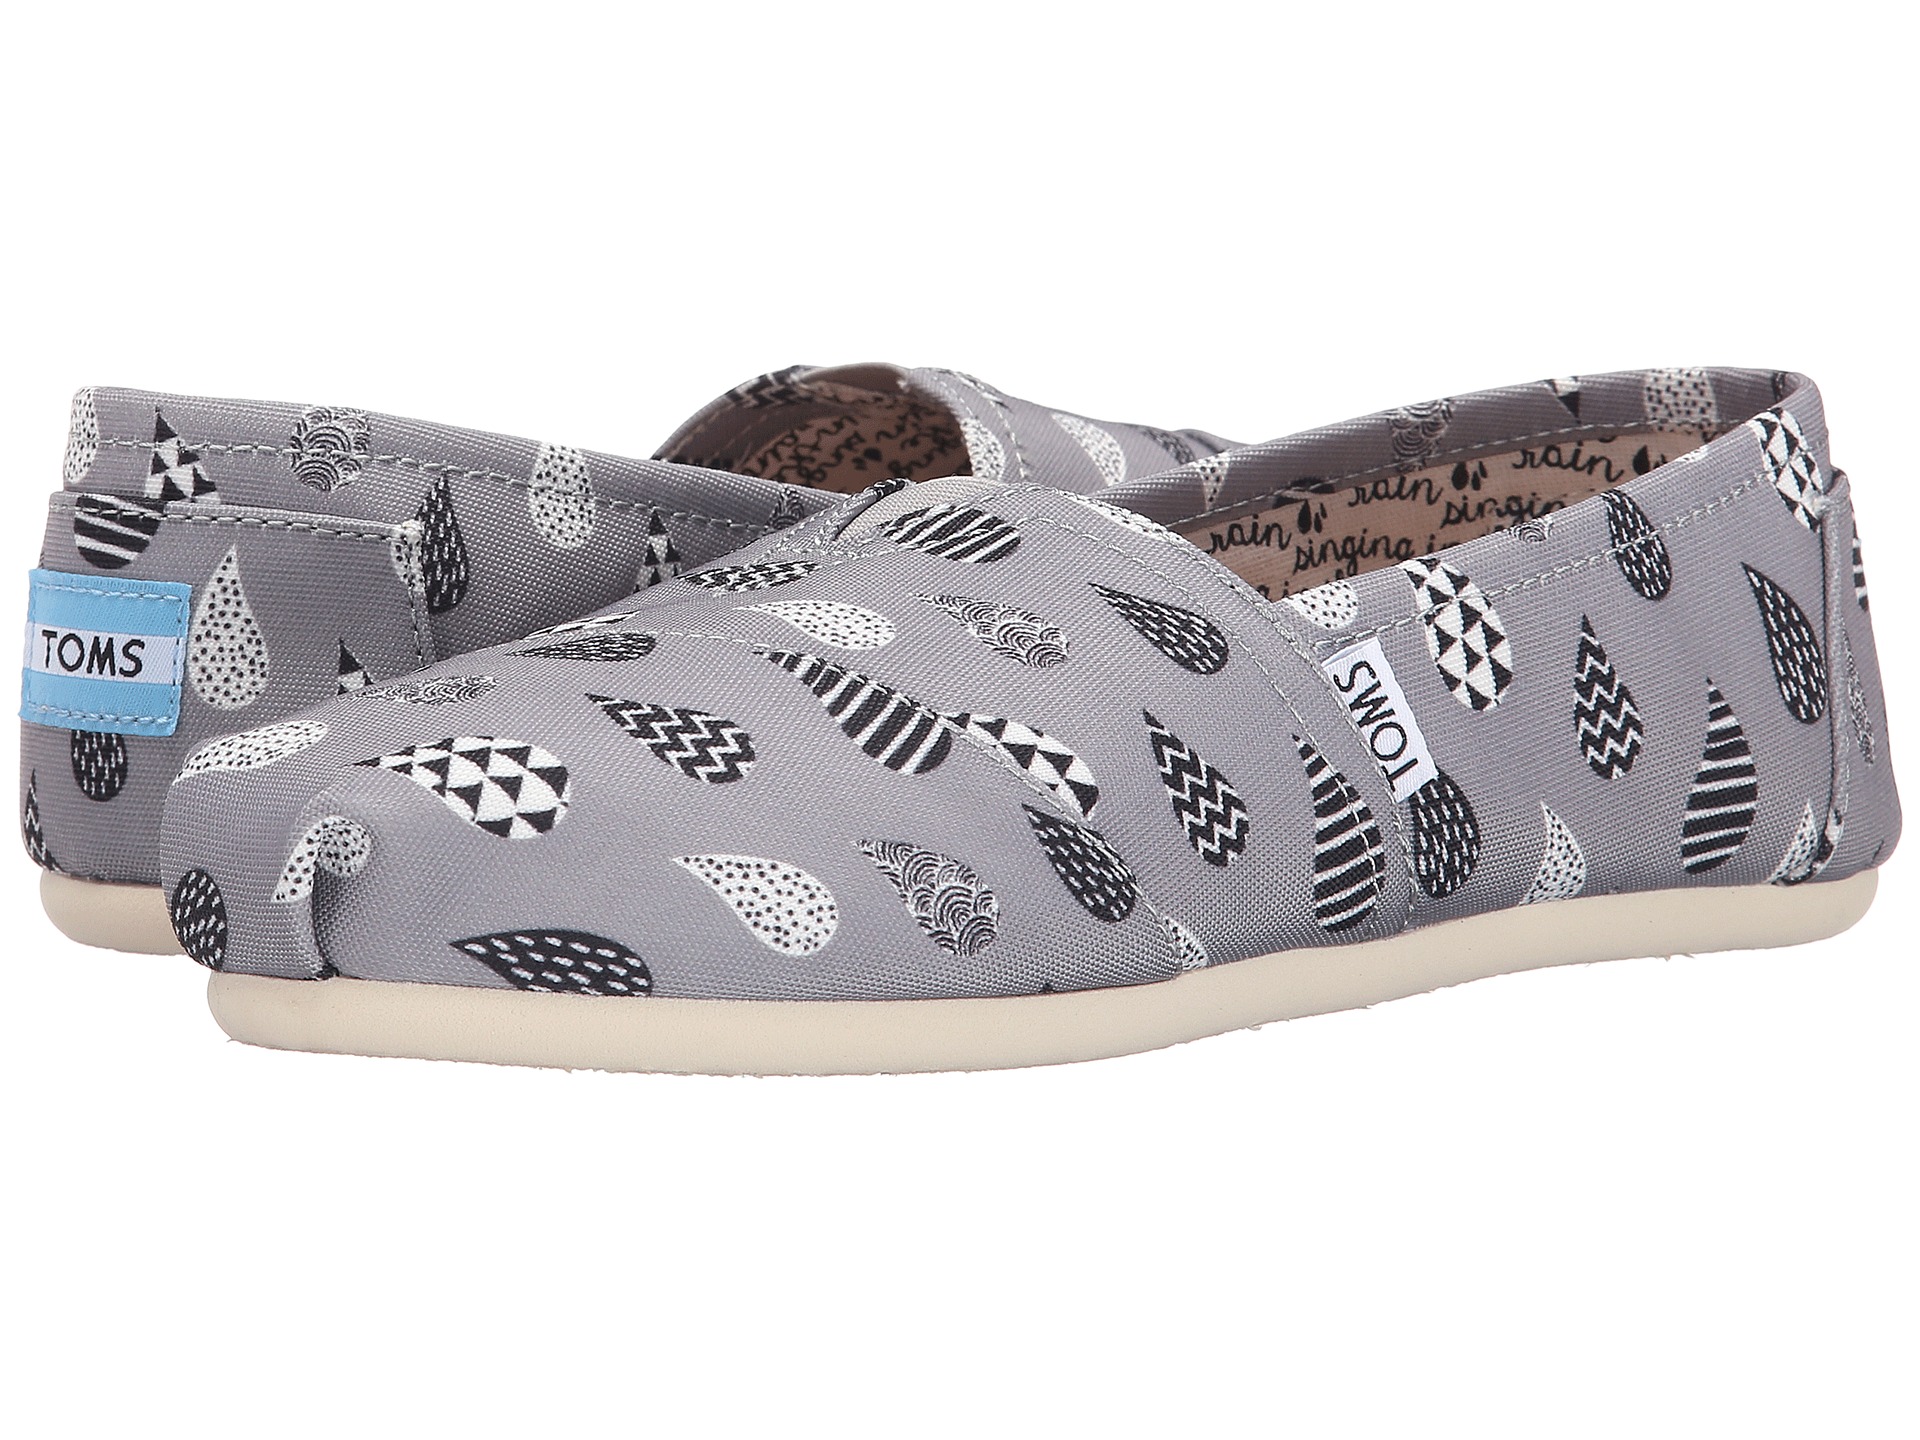 Toms Shoes – As Low As $27.00! Free shipping!